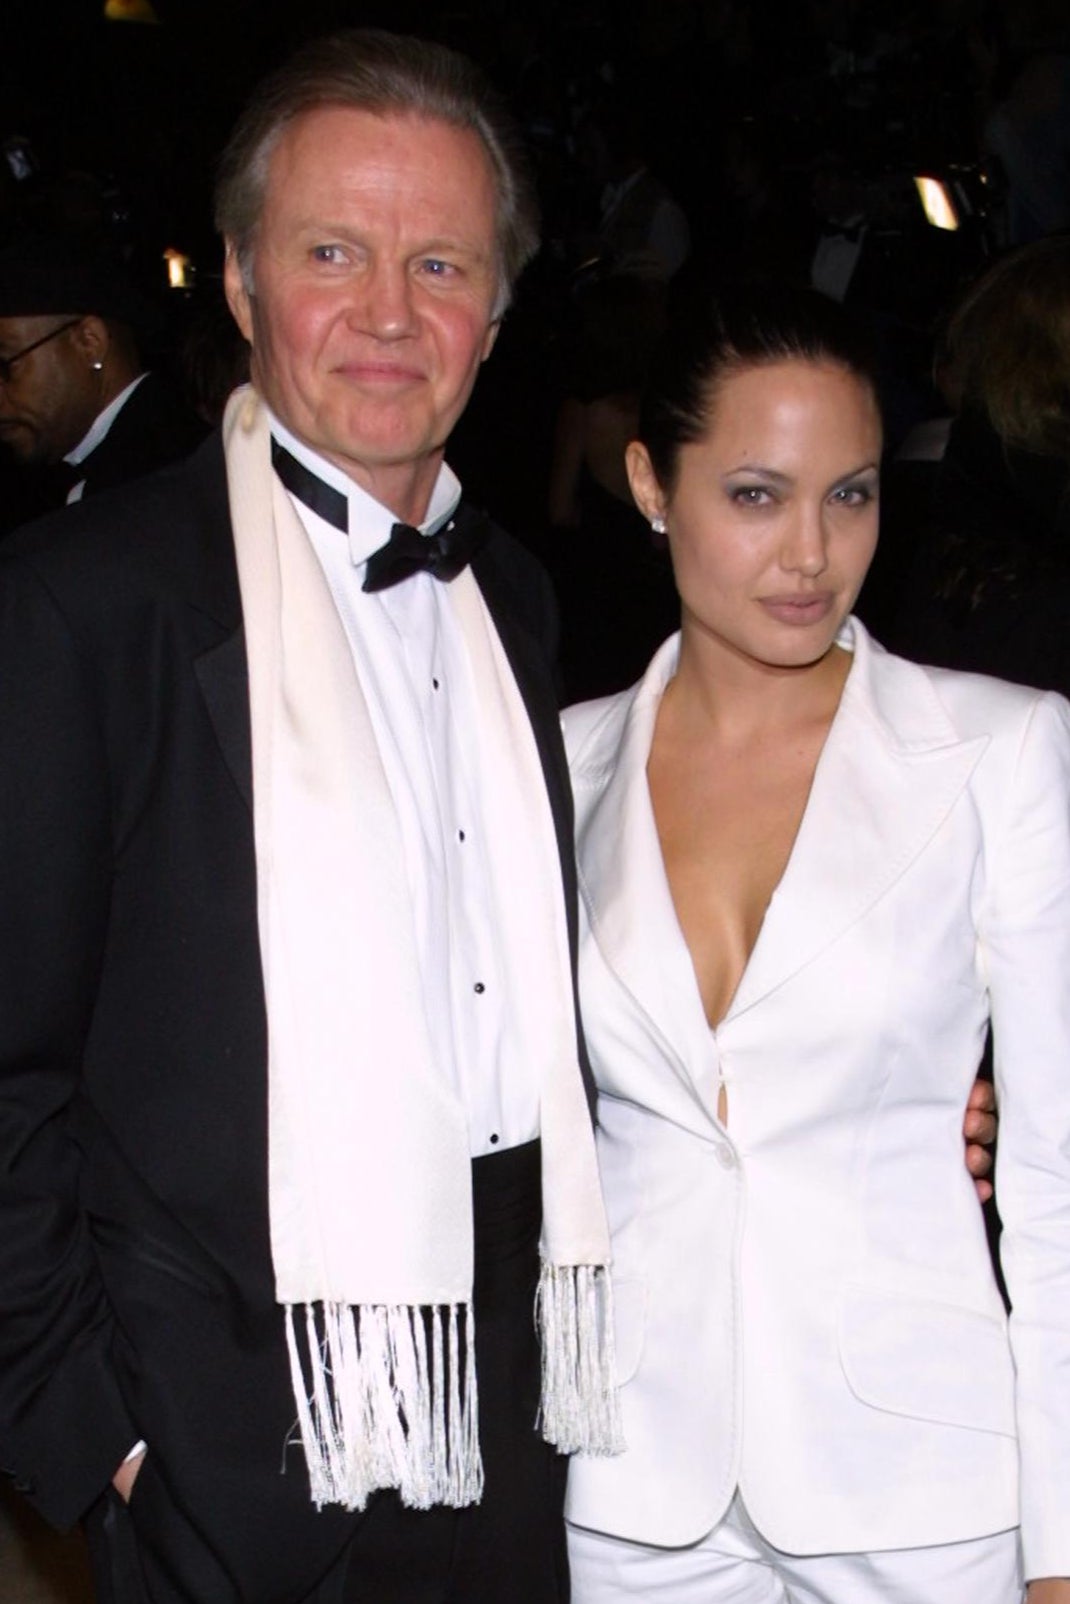 Tempestuous: Voight and his daughter Angelina Jolie in 2001